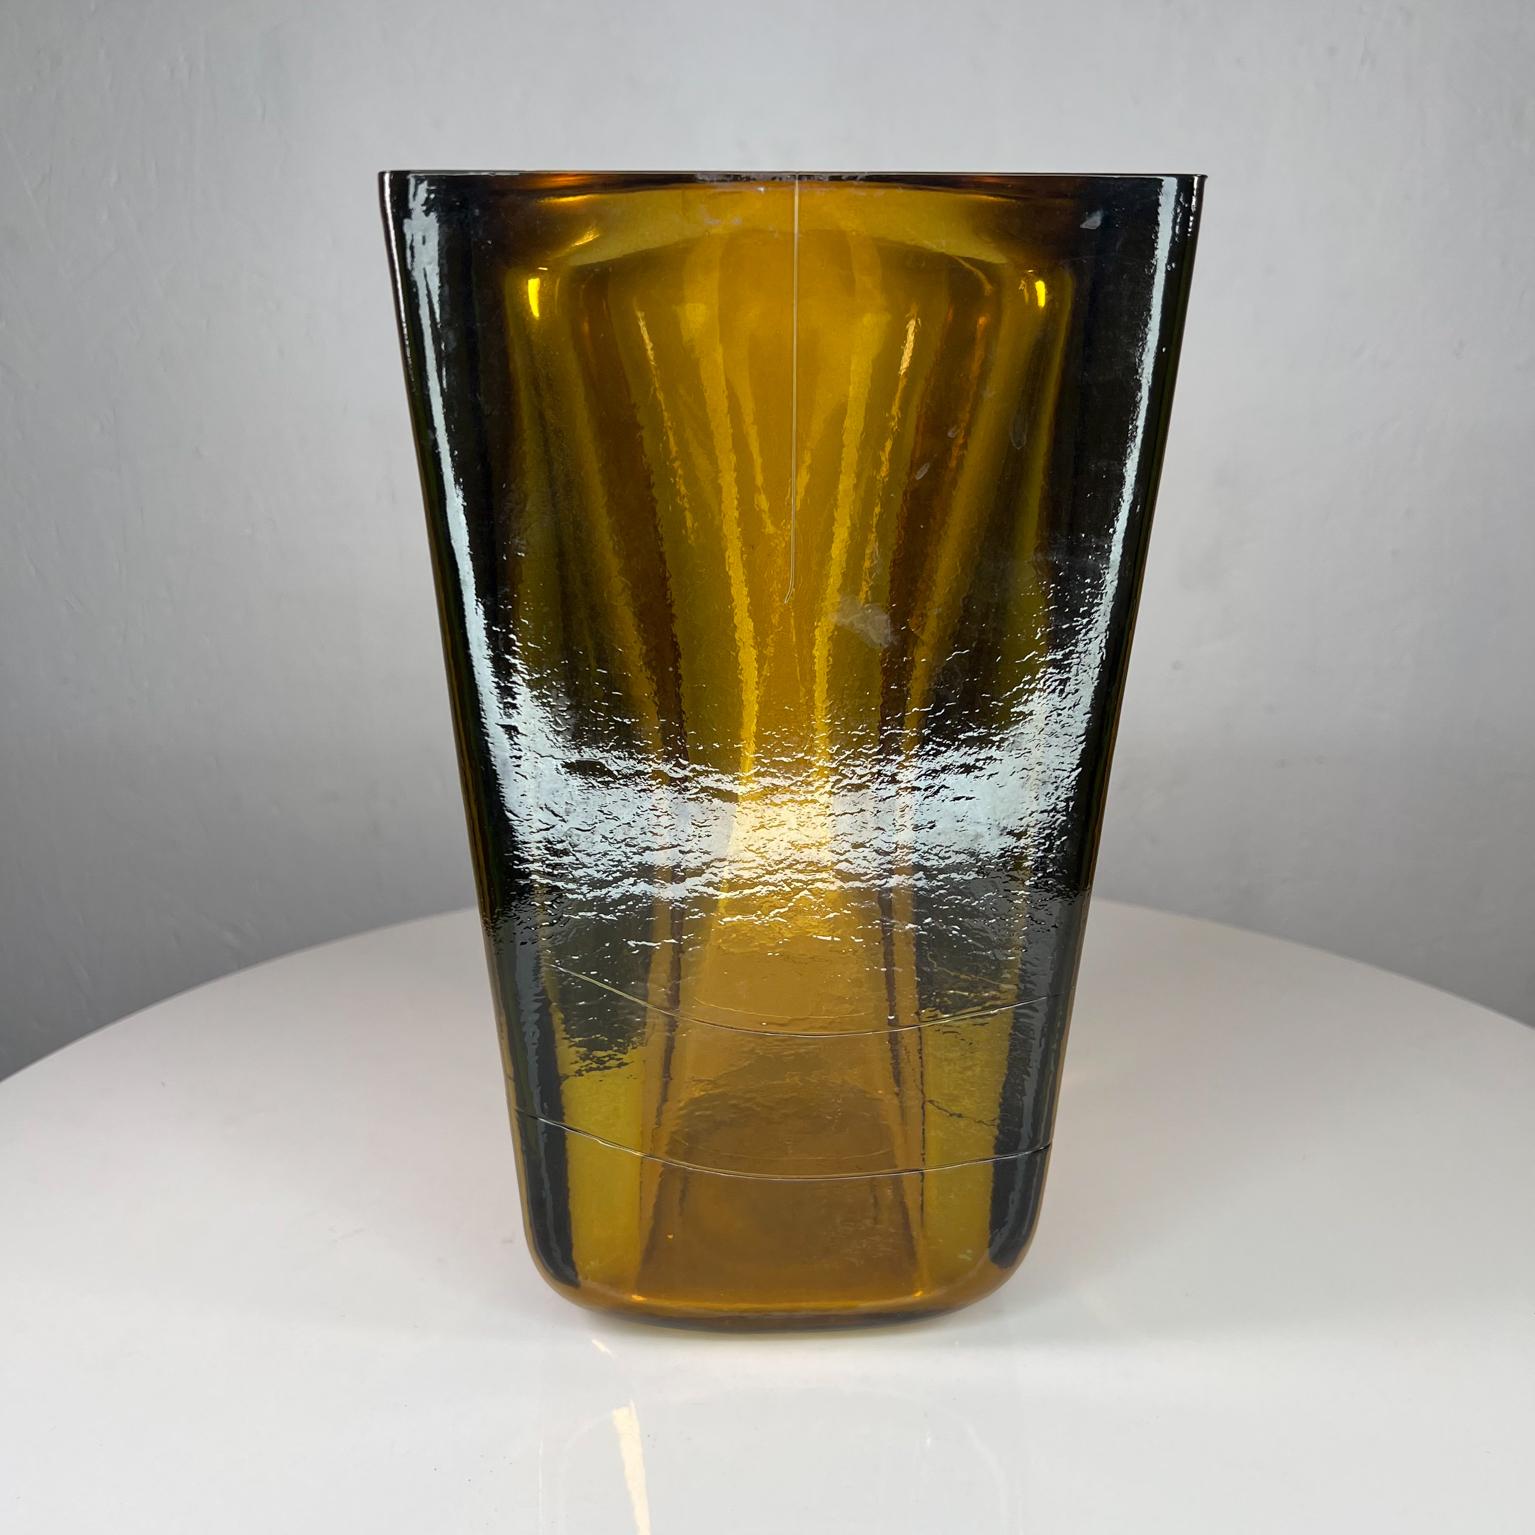 Modernist Amber Art Glass vase Style of Blenko
Thick glass panels
Unsigned attributed to Blenko Glass Co
11 tall x 6.38 x 6.38
Preowned original vintage condition
See images provided.